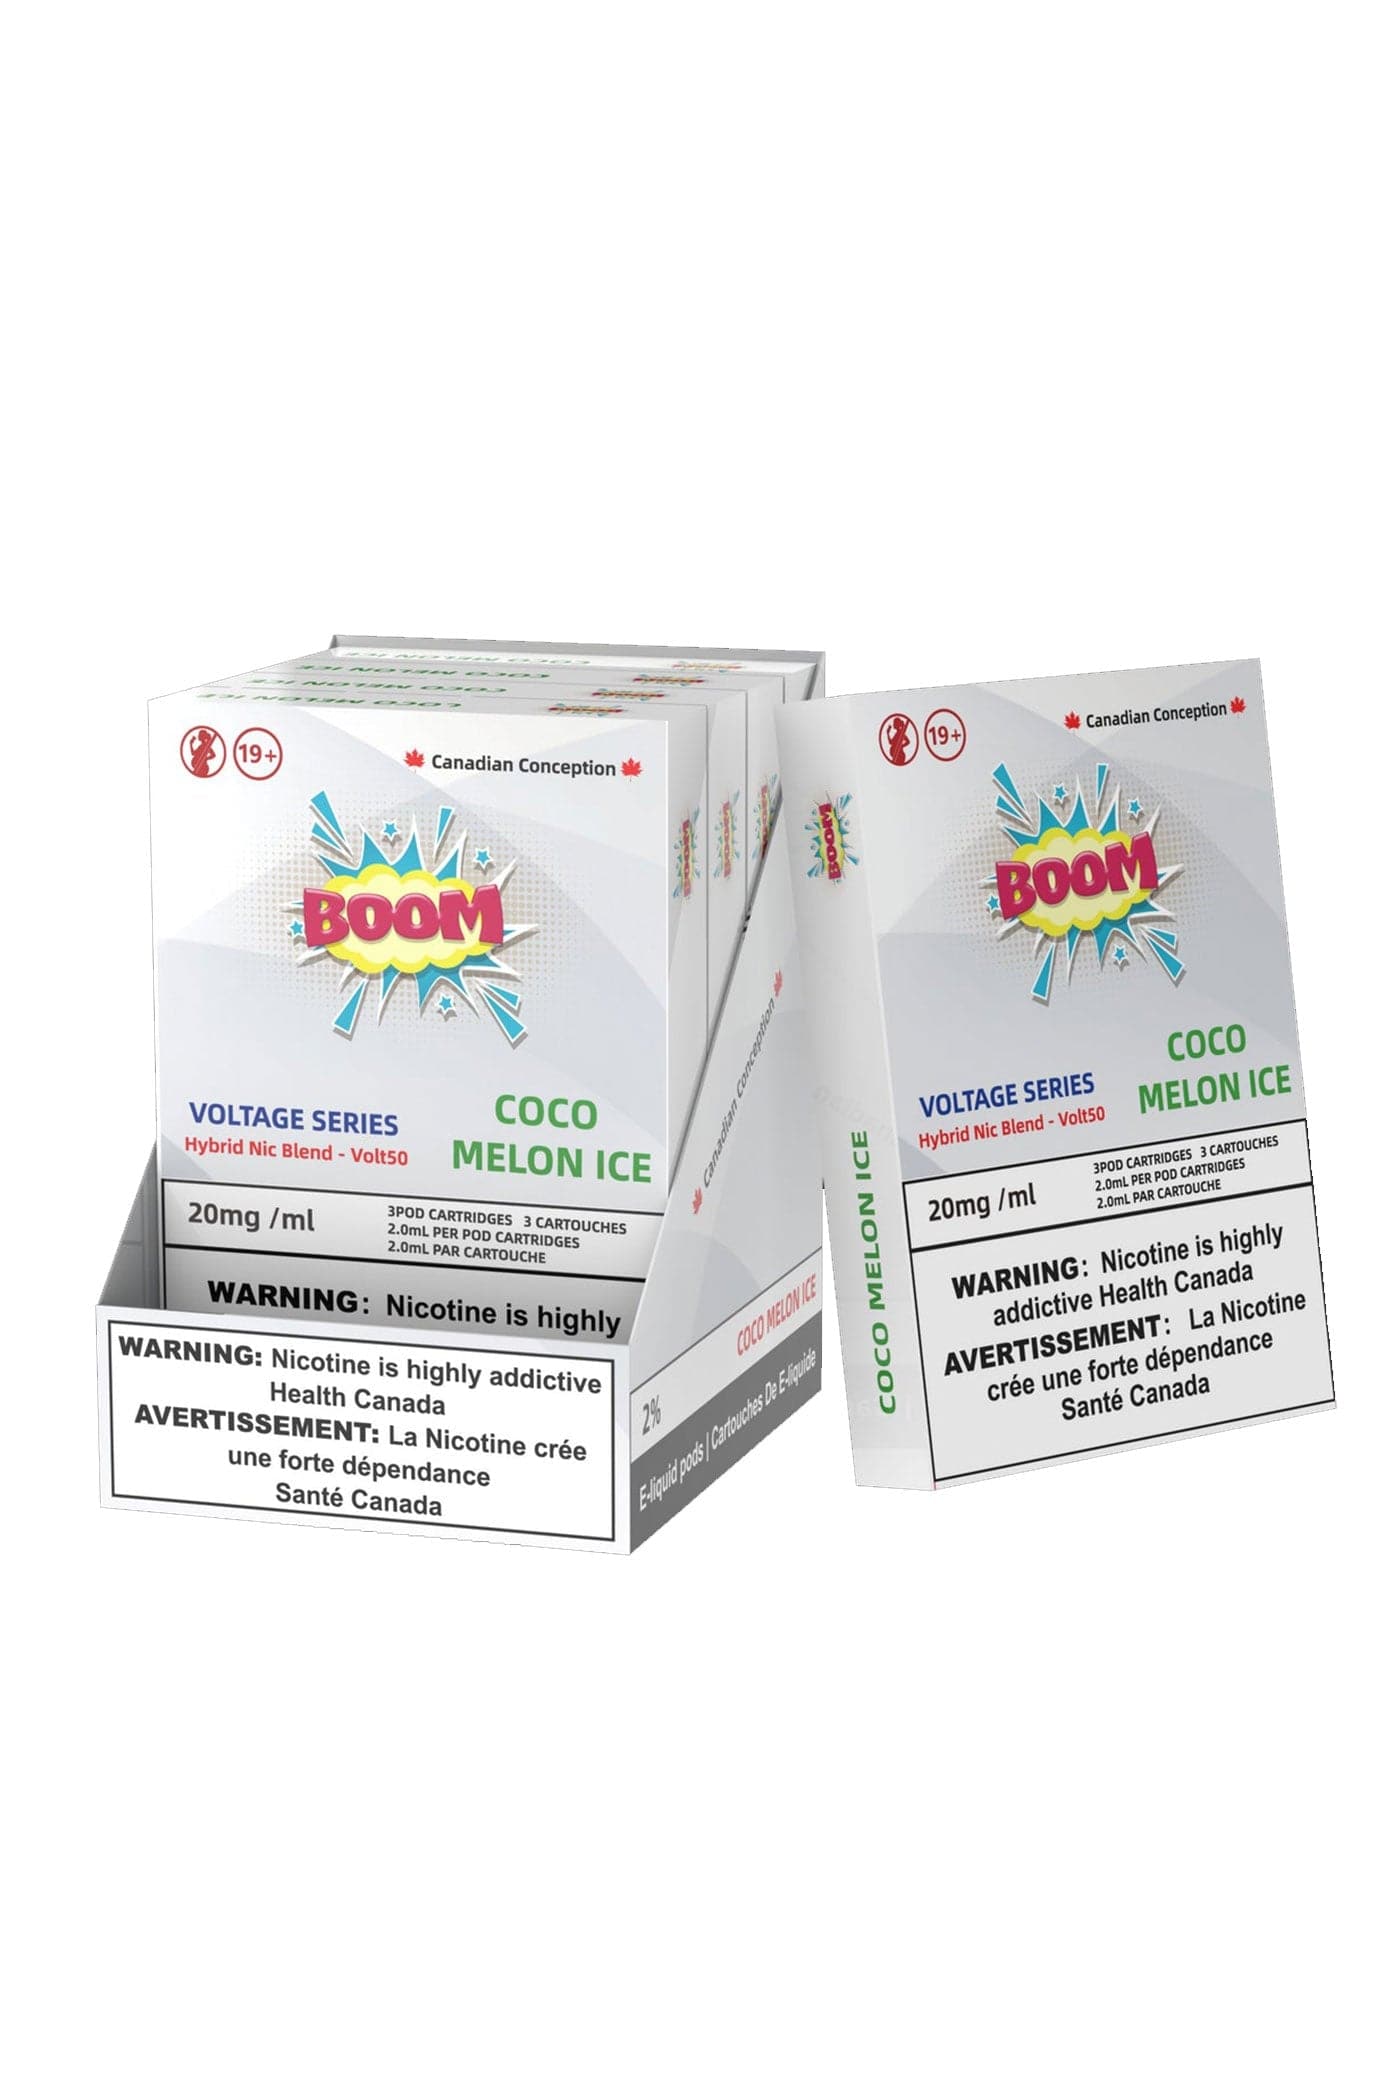 Boom Hybrid Nic Blend Pods 20mg (S Compatible) Box of 5 - Voltage Series